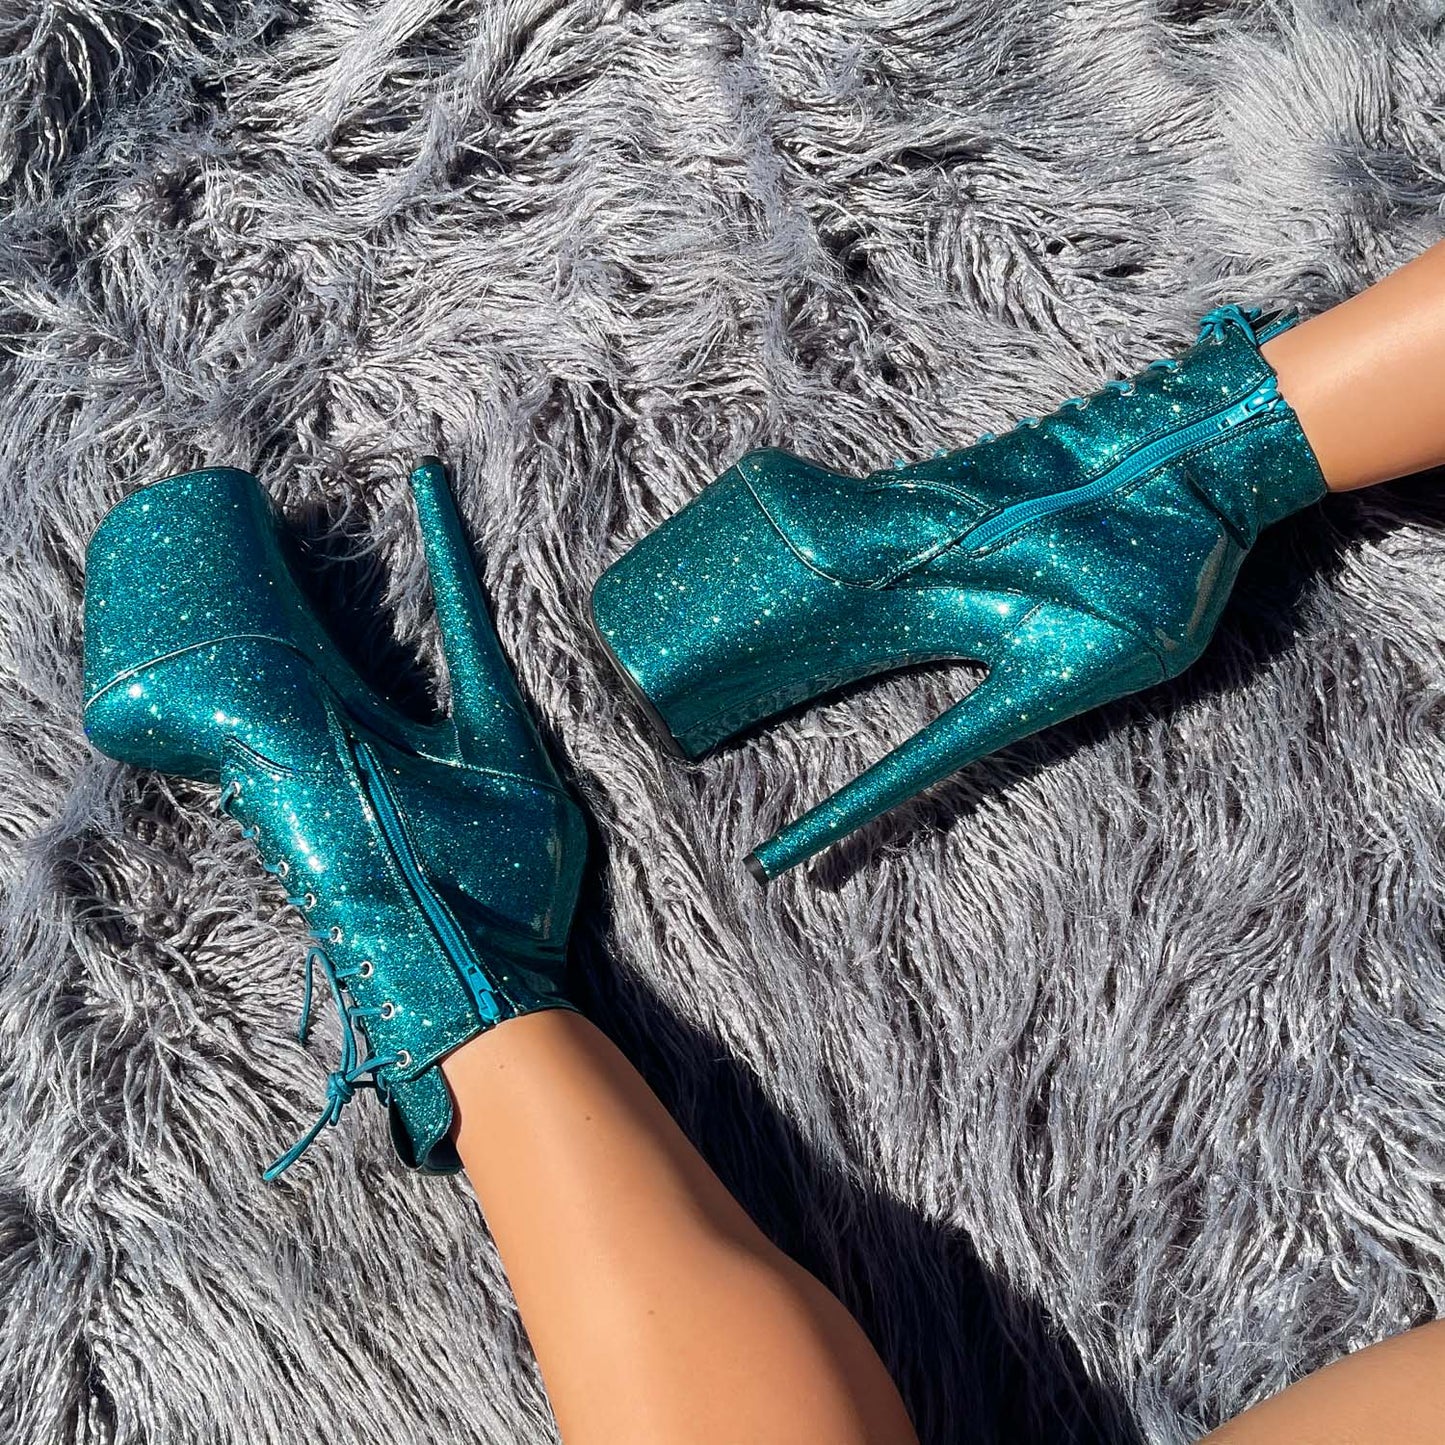 The Glitterati Ankle Boot - Ocean Eyes - 8 INCH